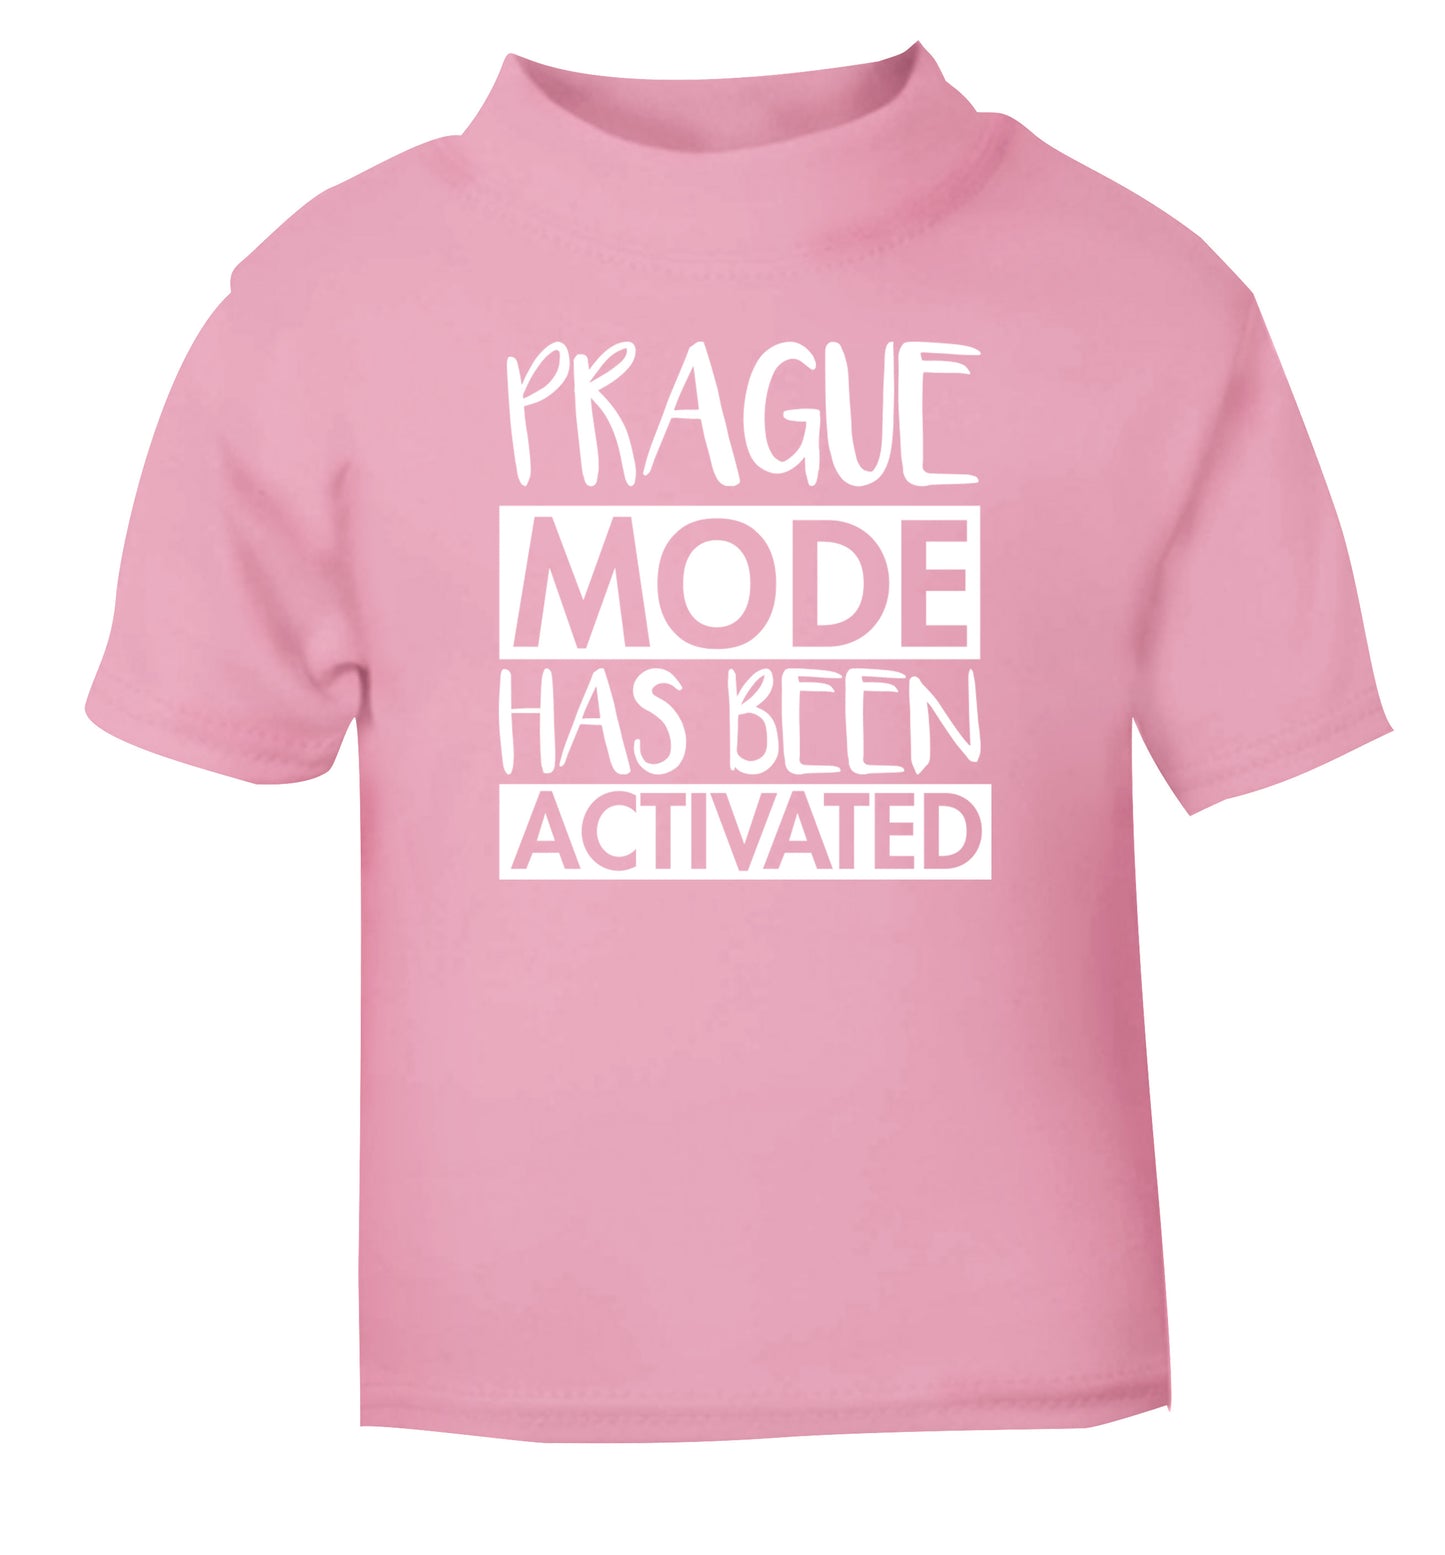 Prague mode has been activated light pink Baby Toddler Tshirt 2 Years